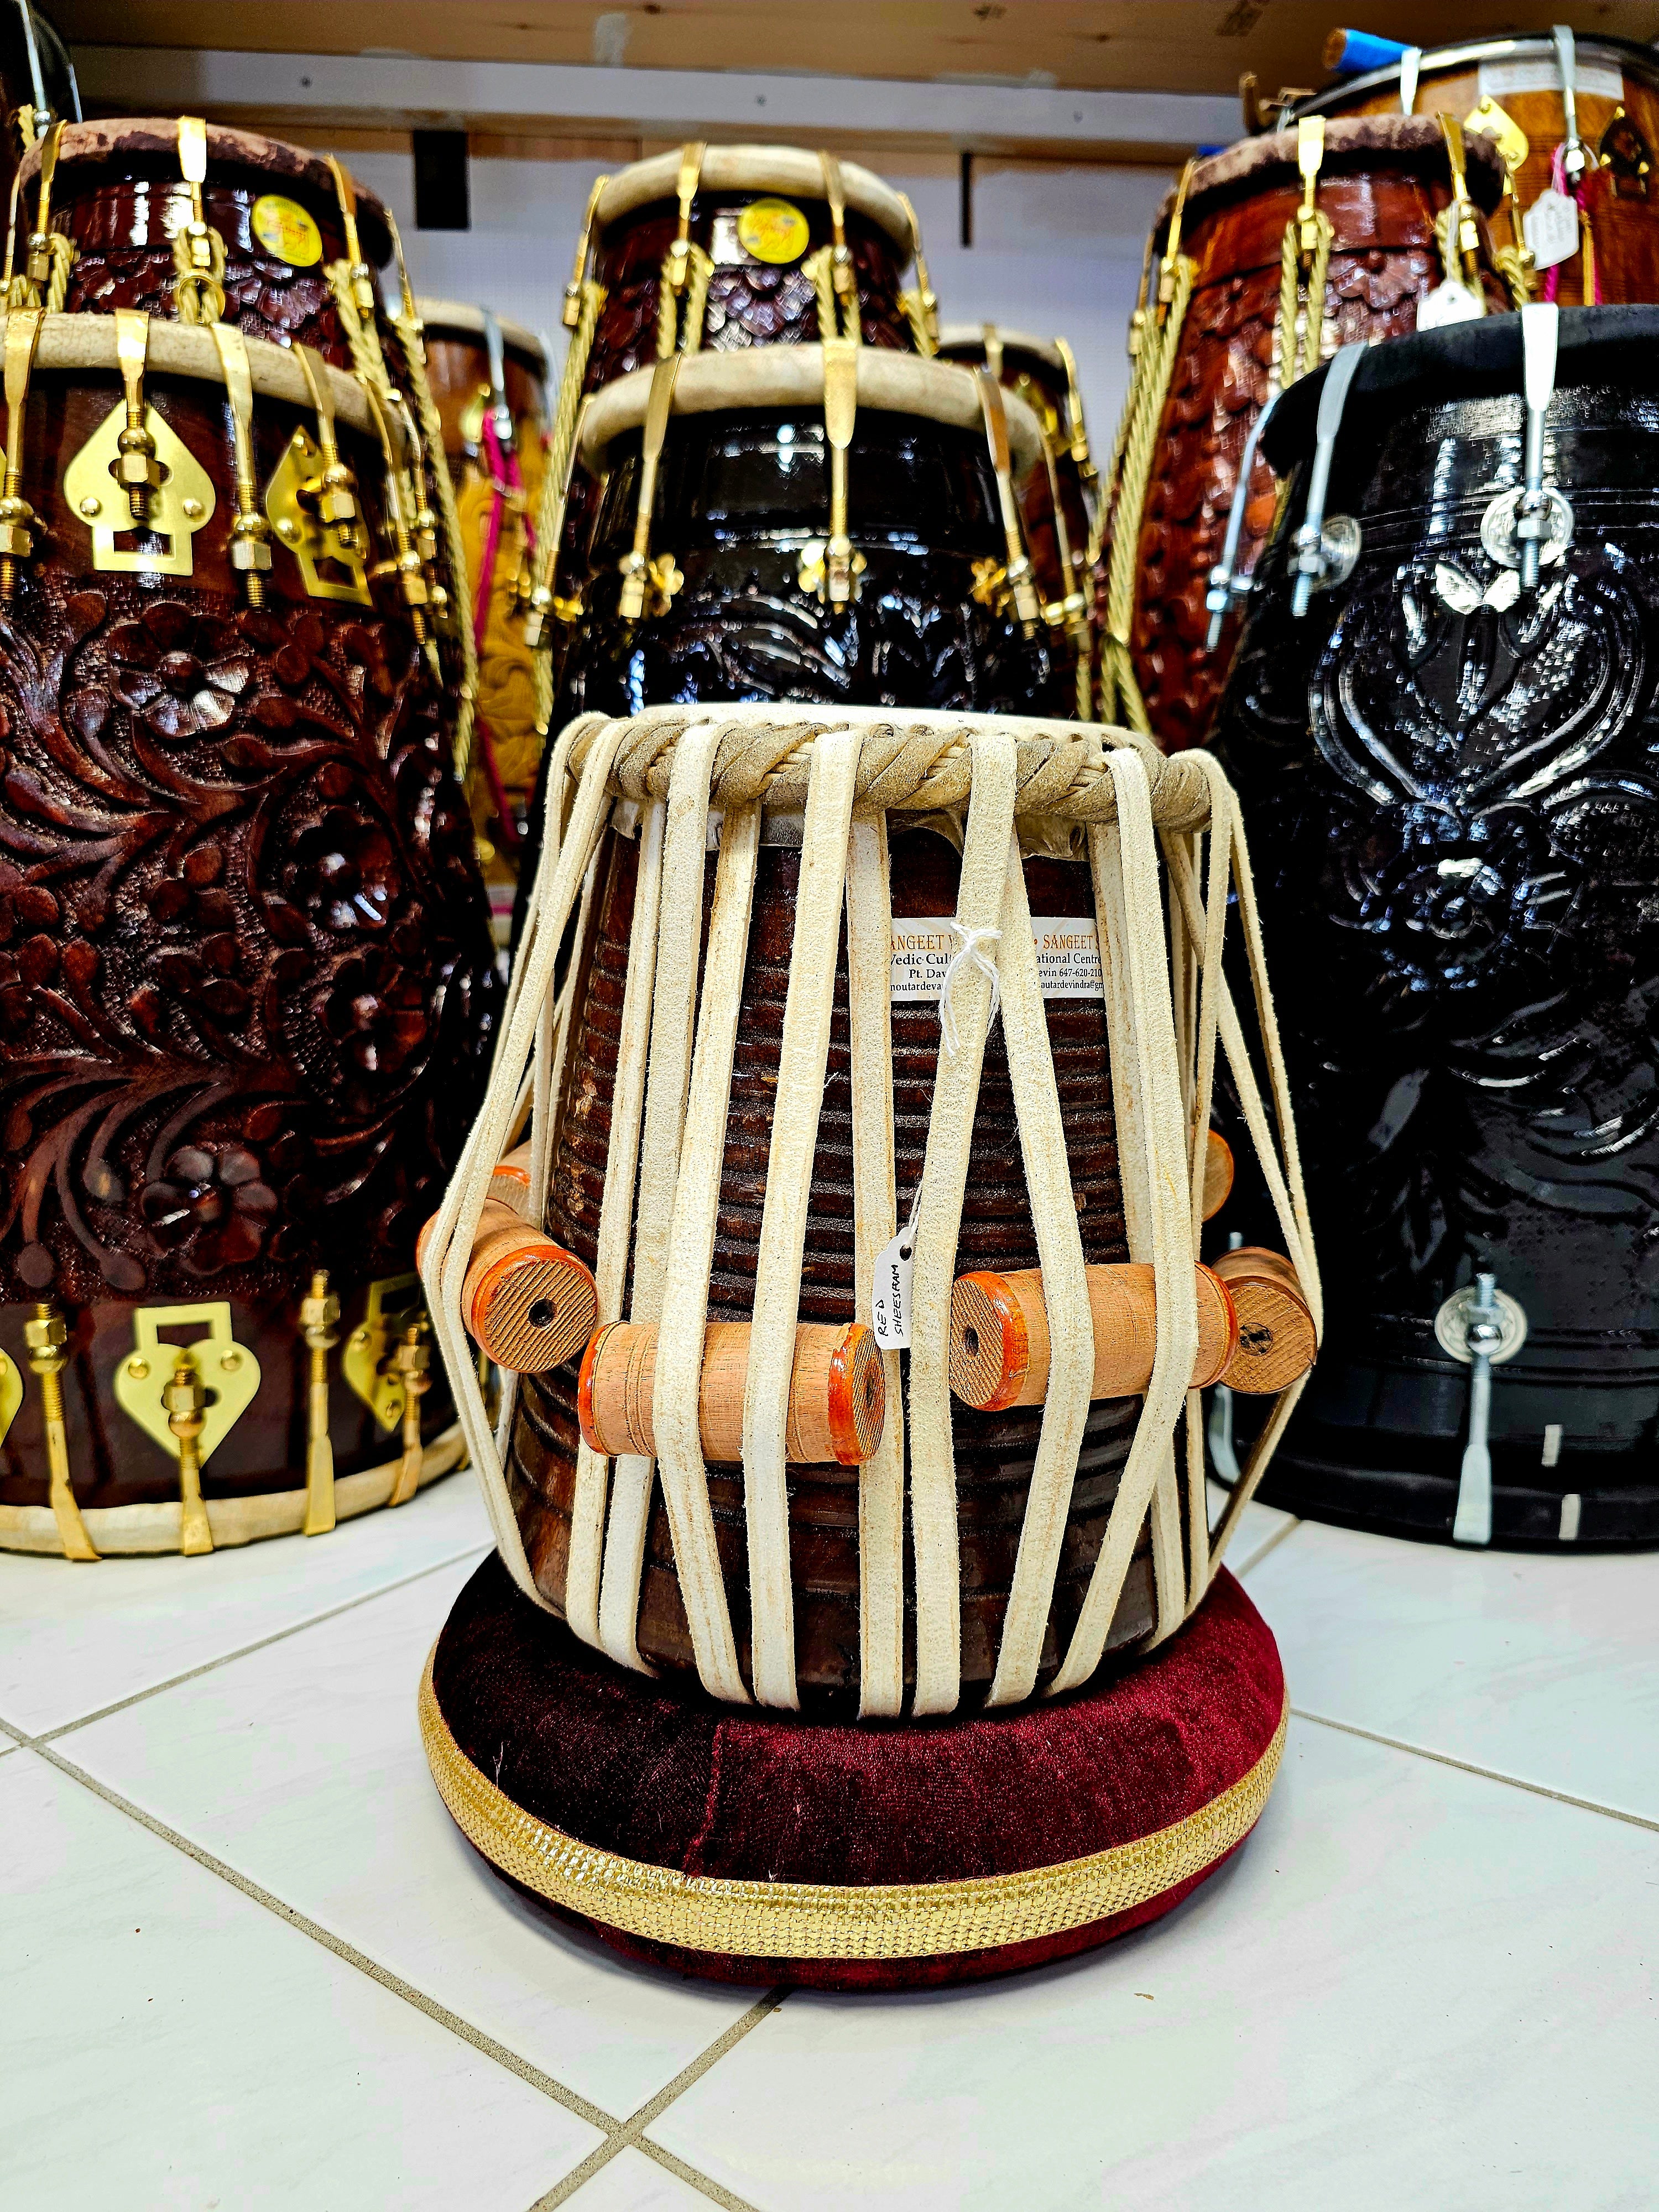 Maestro Tone E 5.5" Professional Red Sheesham Dayan Tabla Drum - Precision-Crafted Musical Excellence